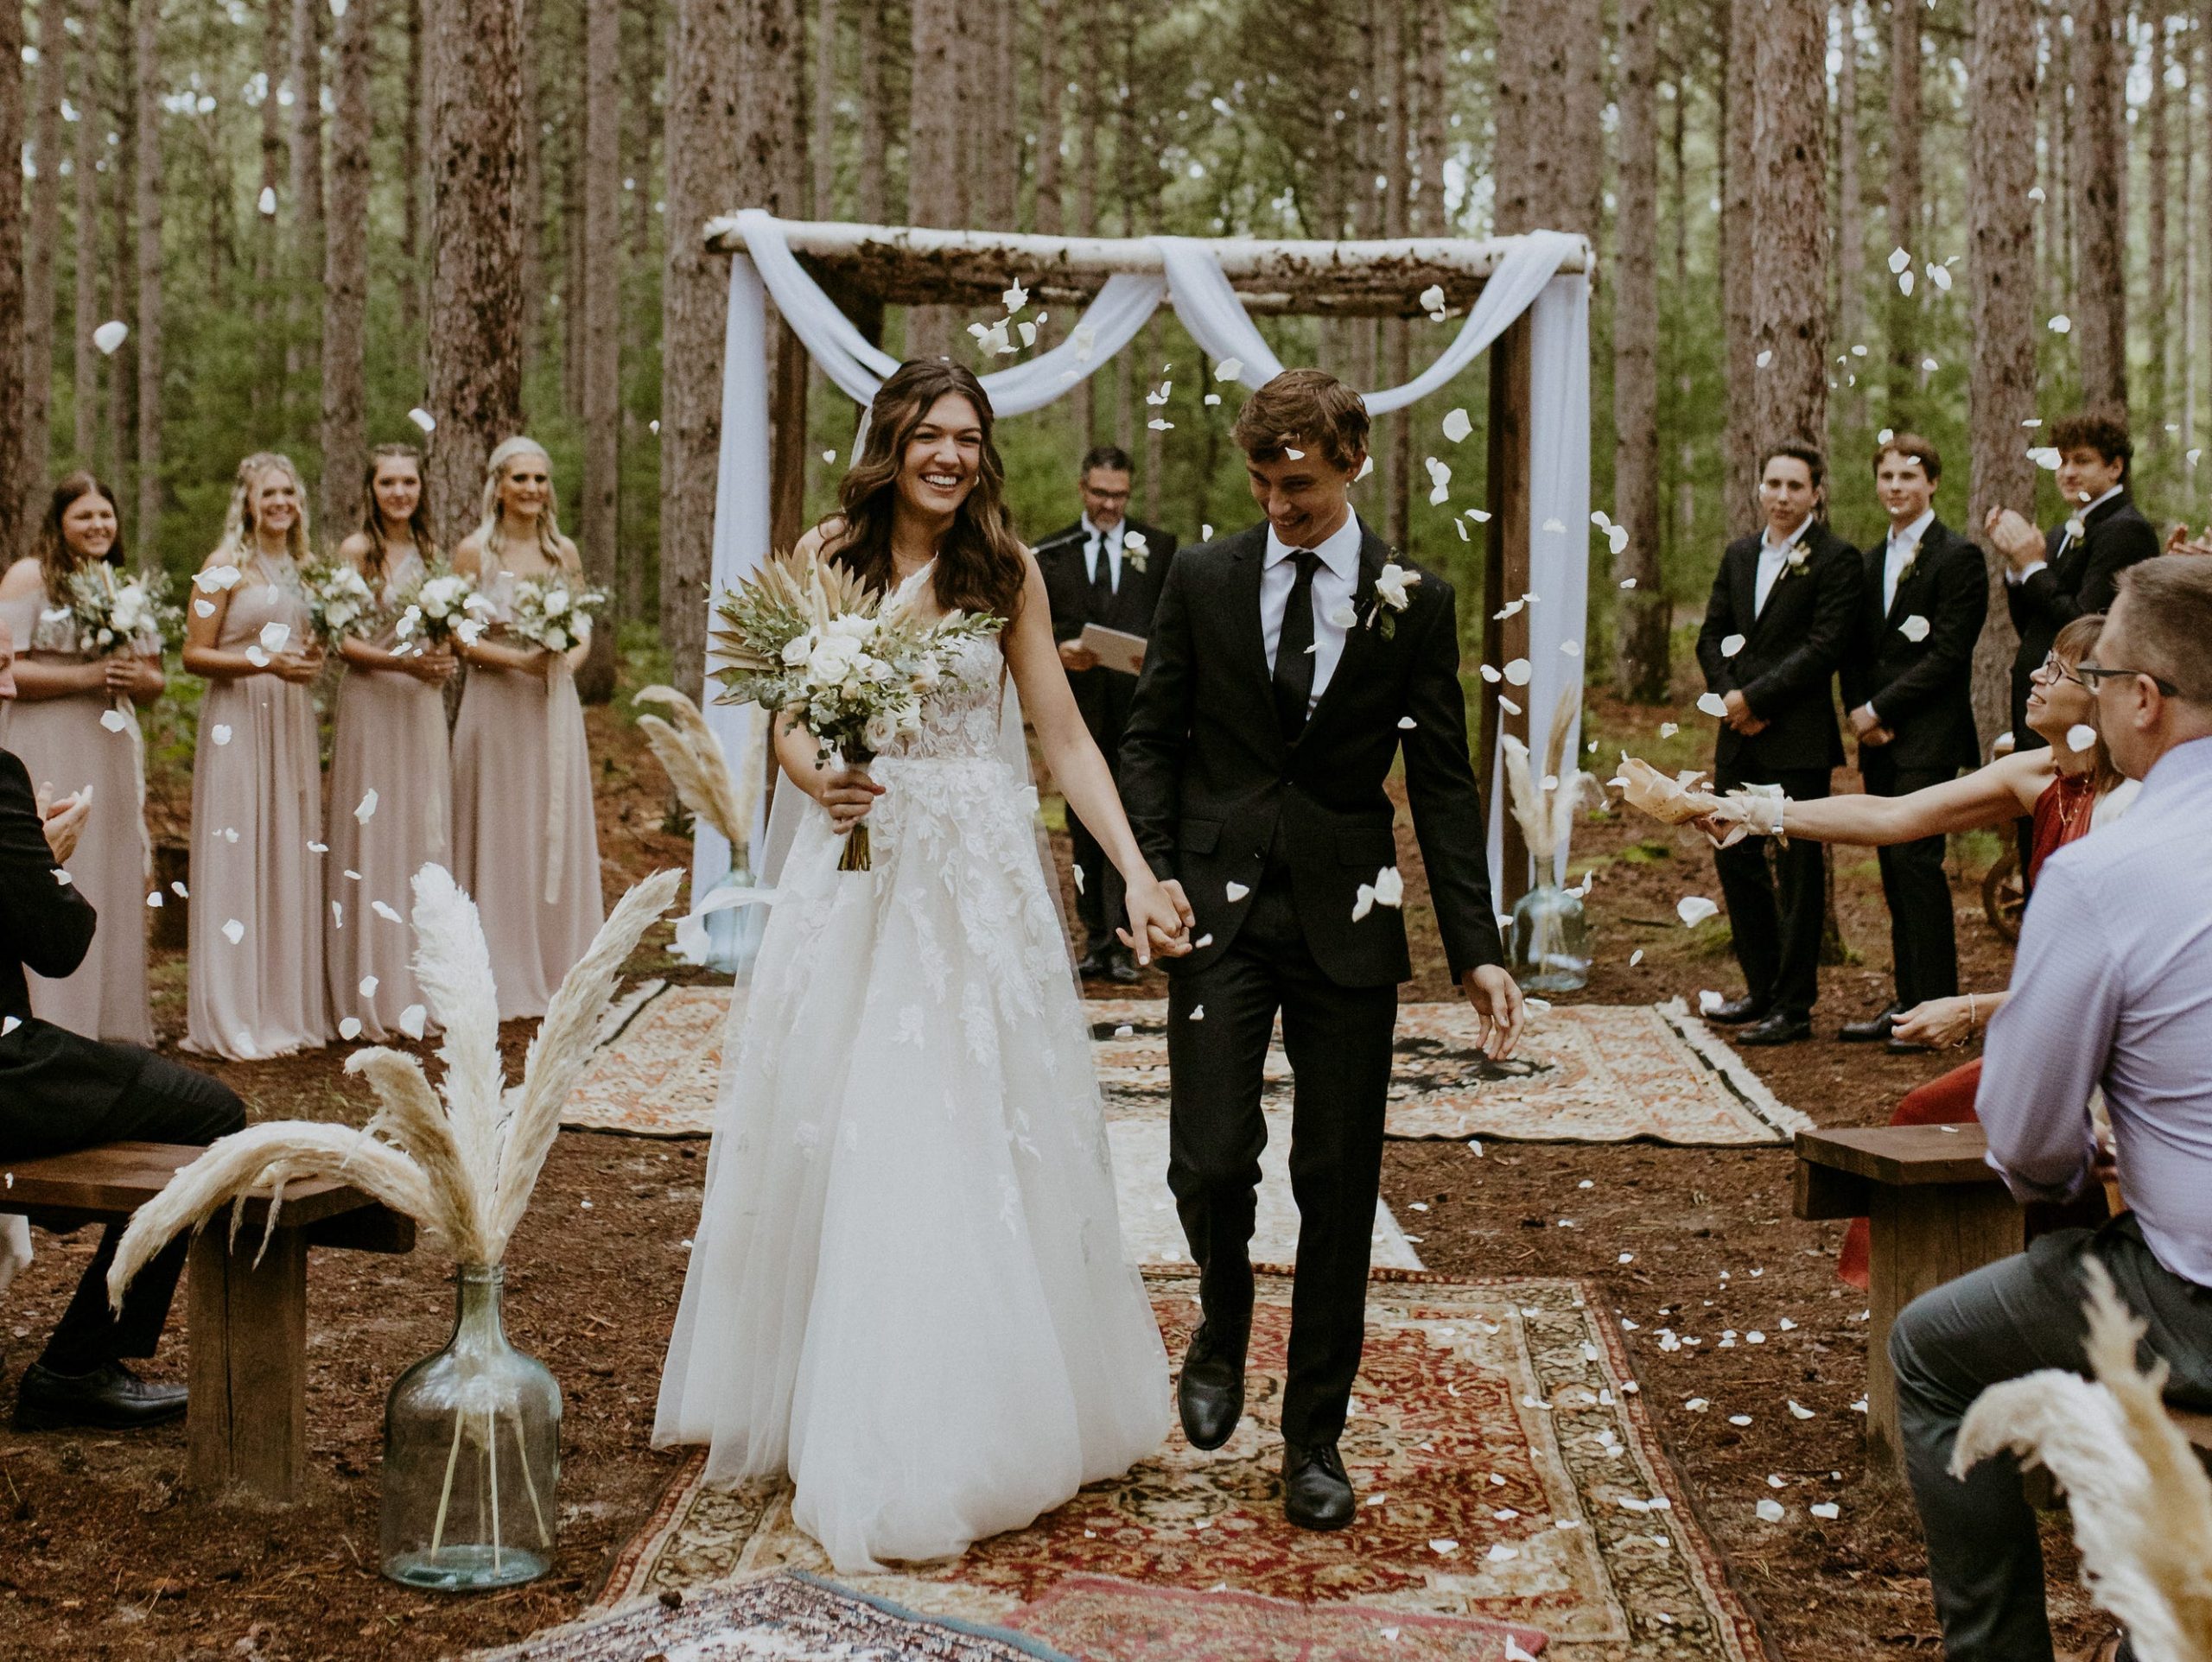 Alayna and Gunner Tripp pictured at their wedding ceremony in a forest in Wisconsin.